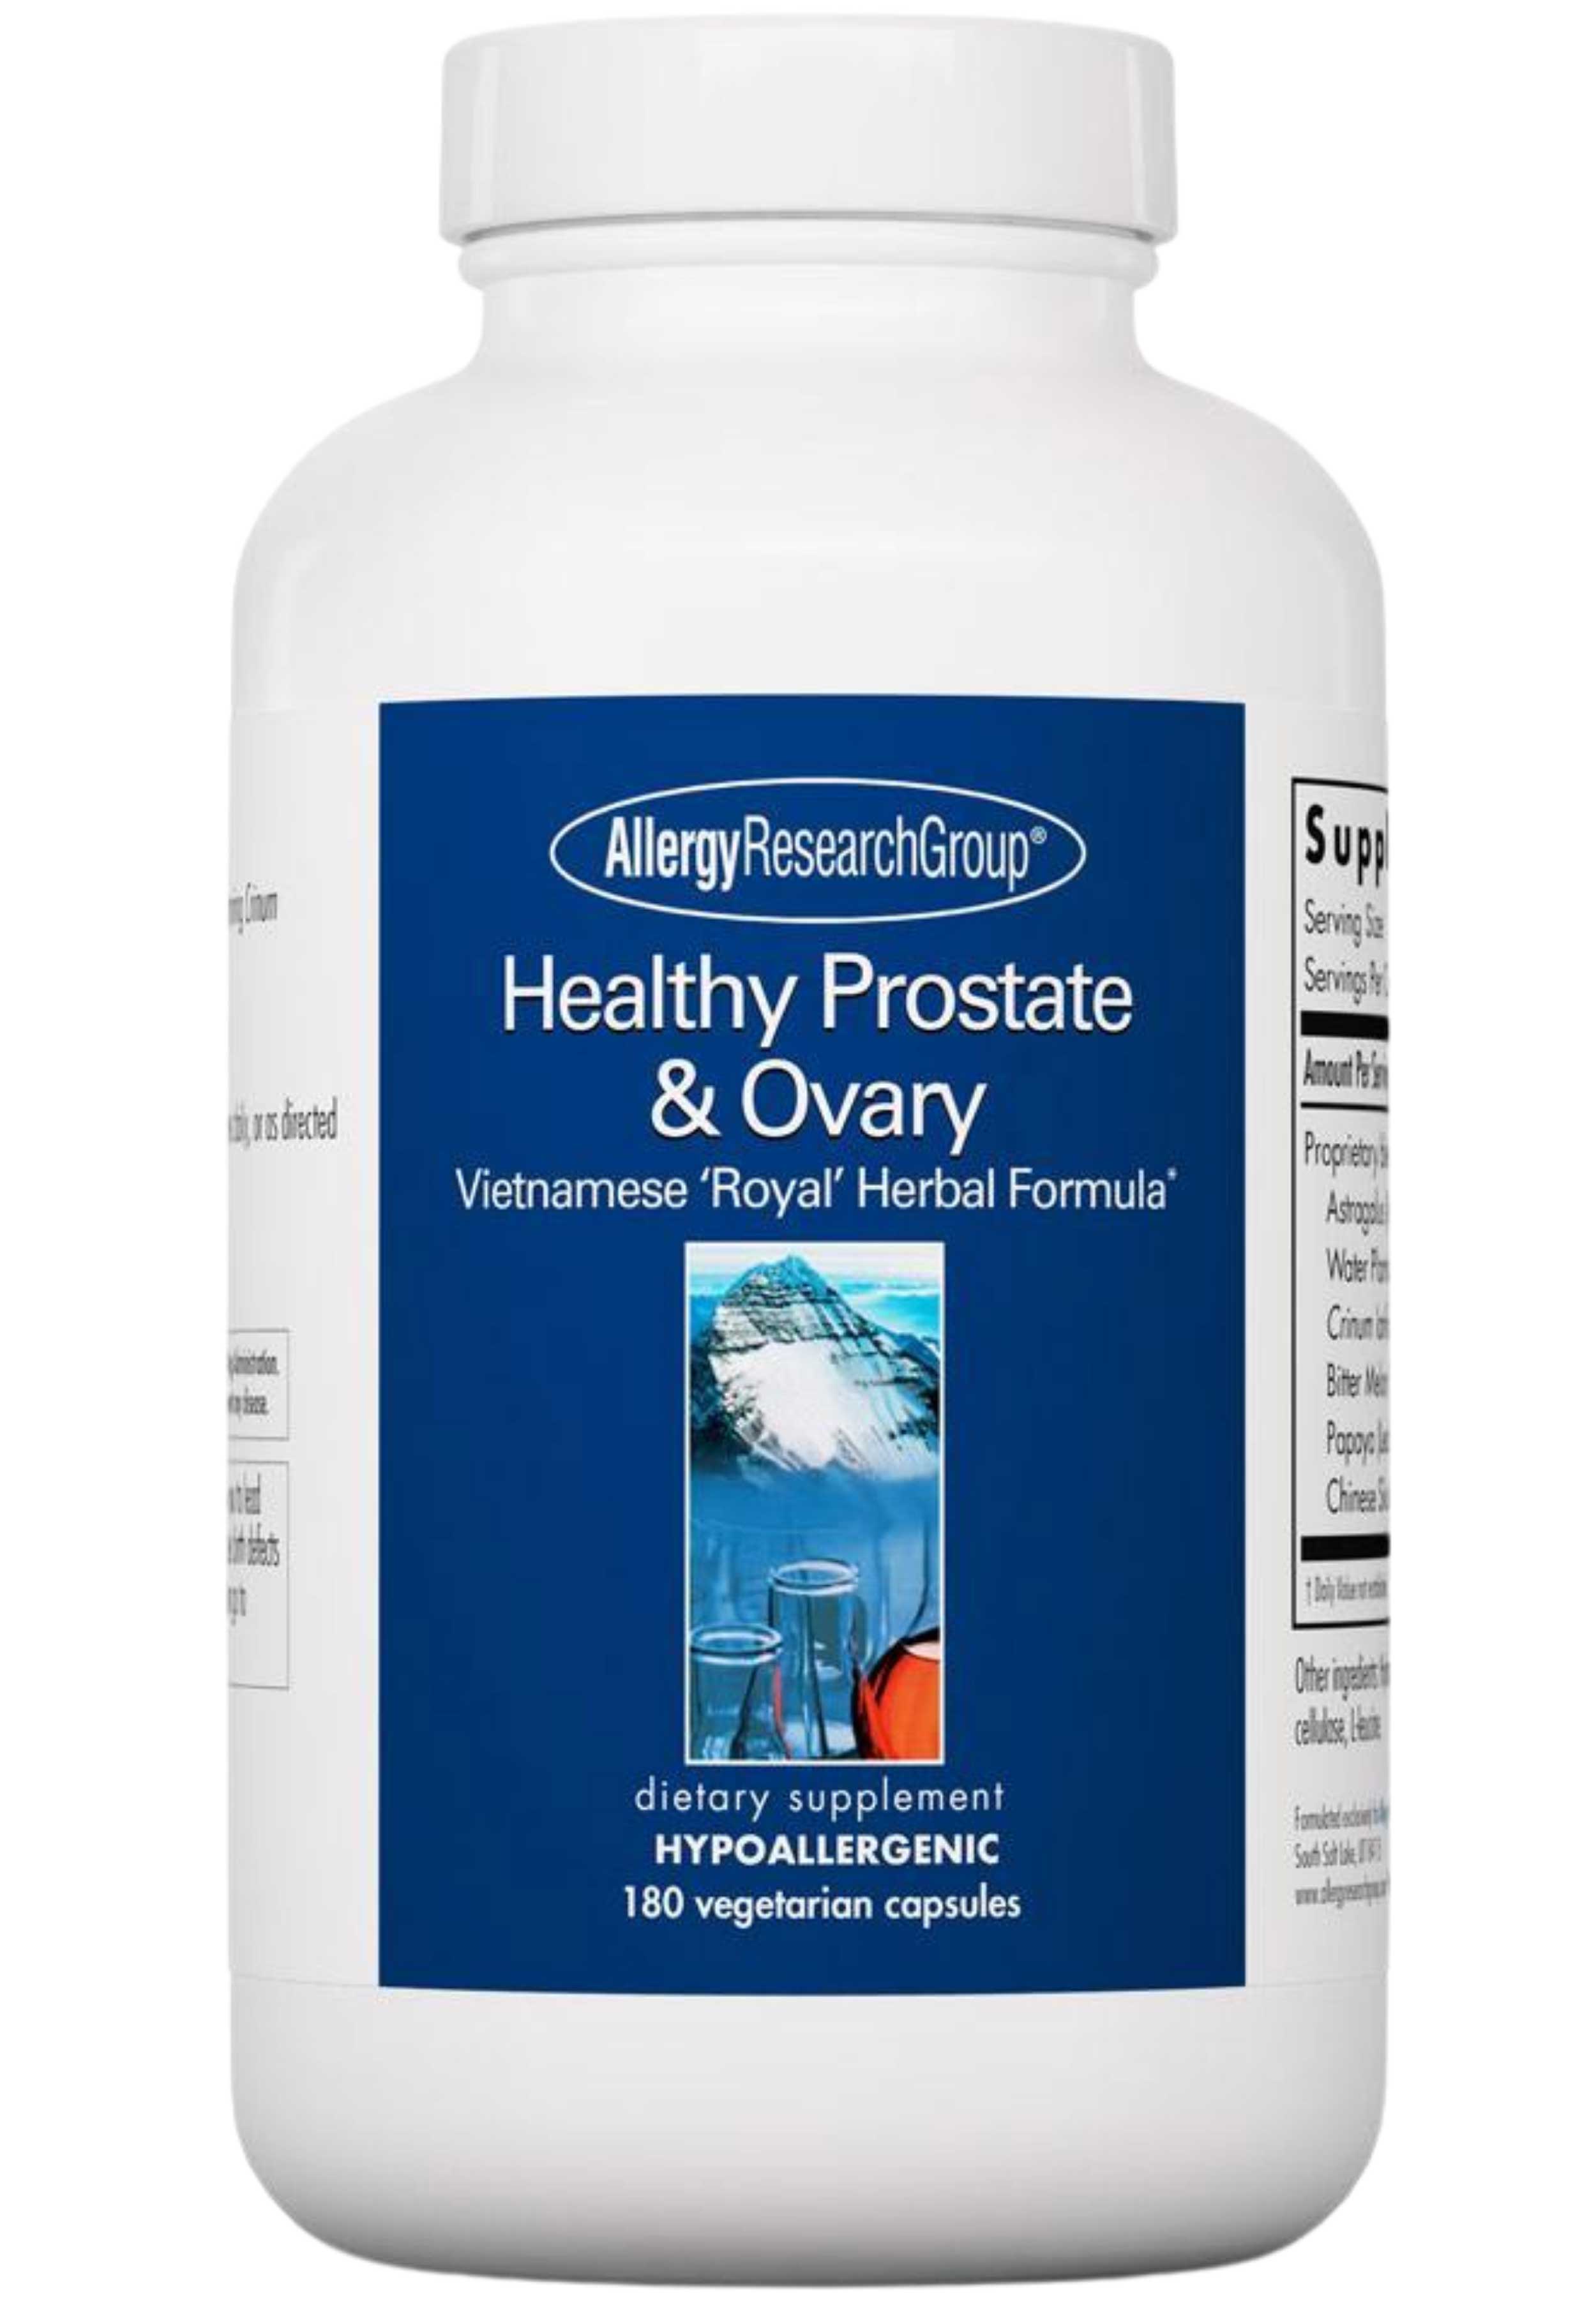 Allergy Research Group Healthy Prostate & Ovary